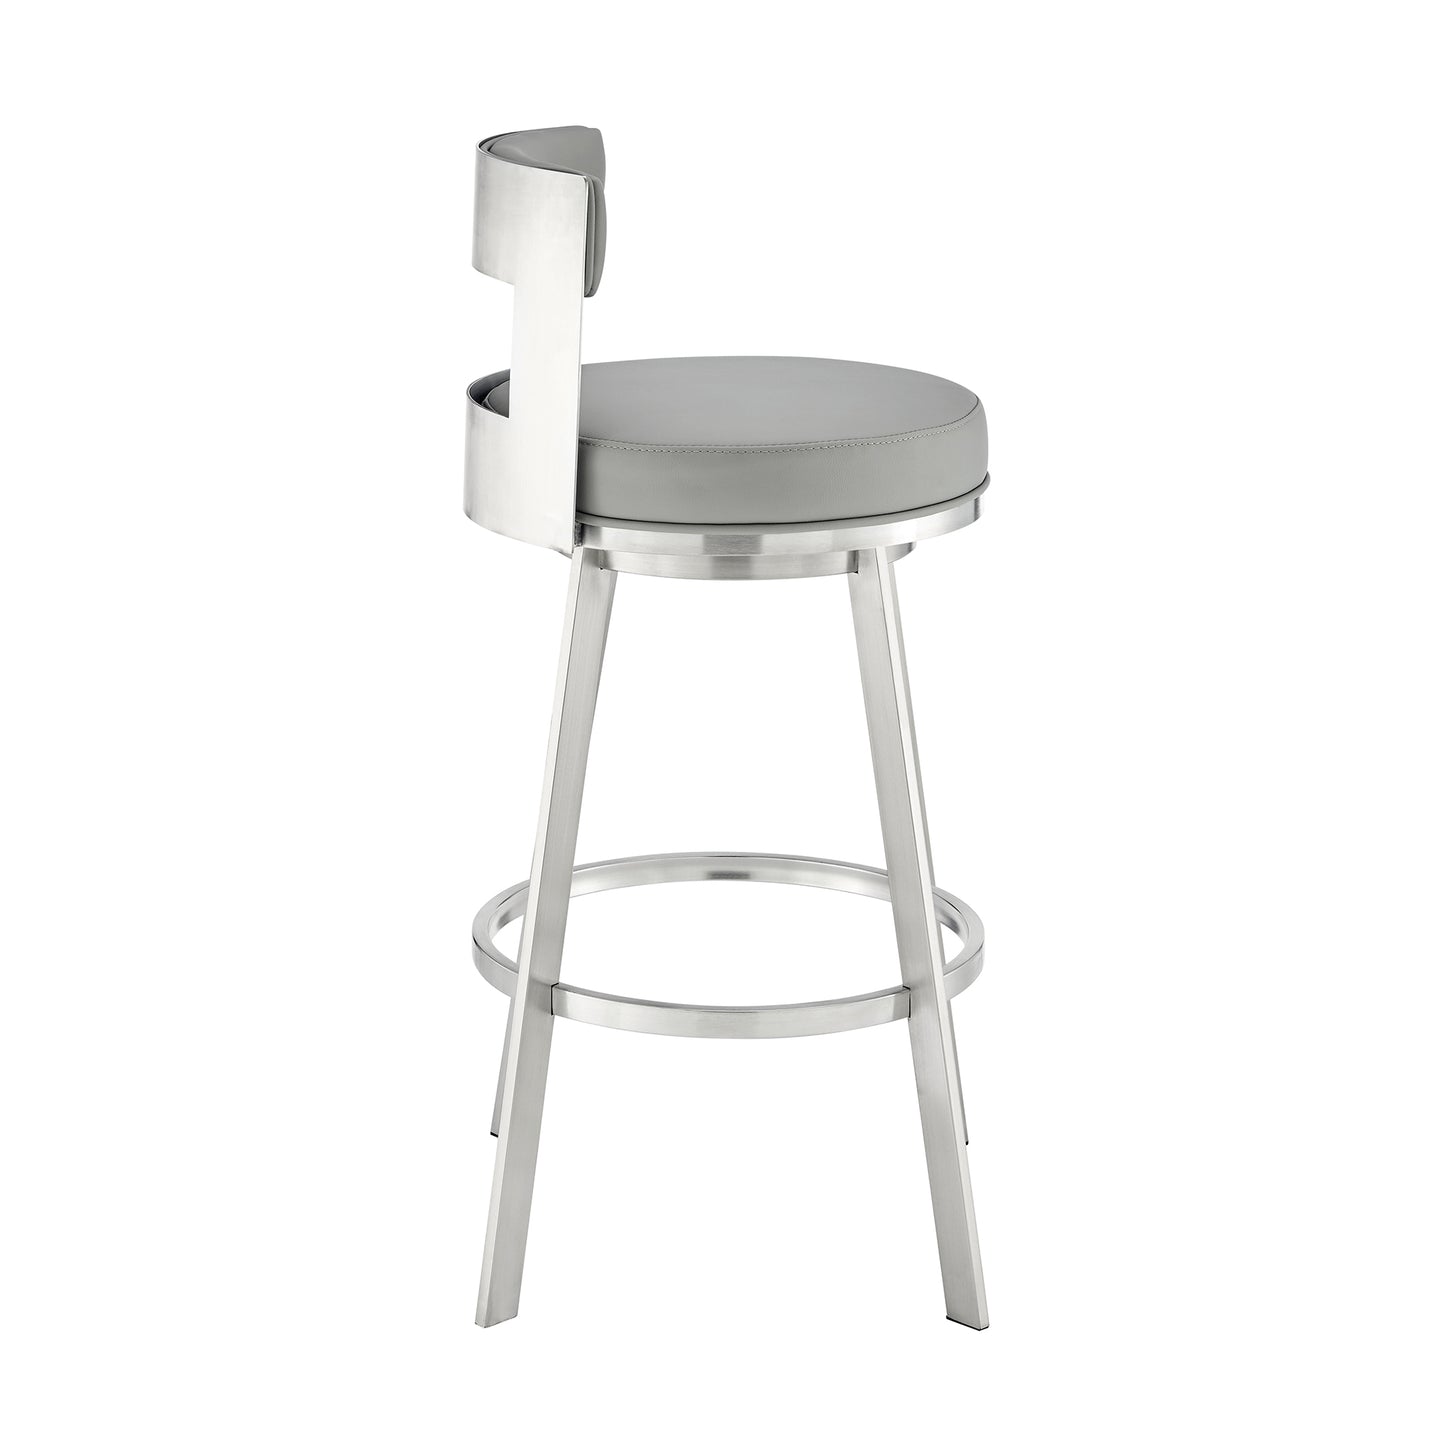 Flynn 30" Swivel Bar Stool in Brushed Stainless Steel with Light Gray Faux Leather